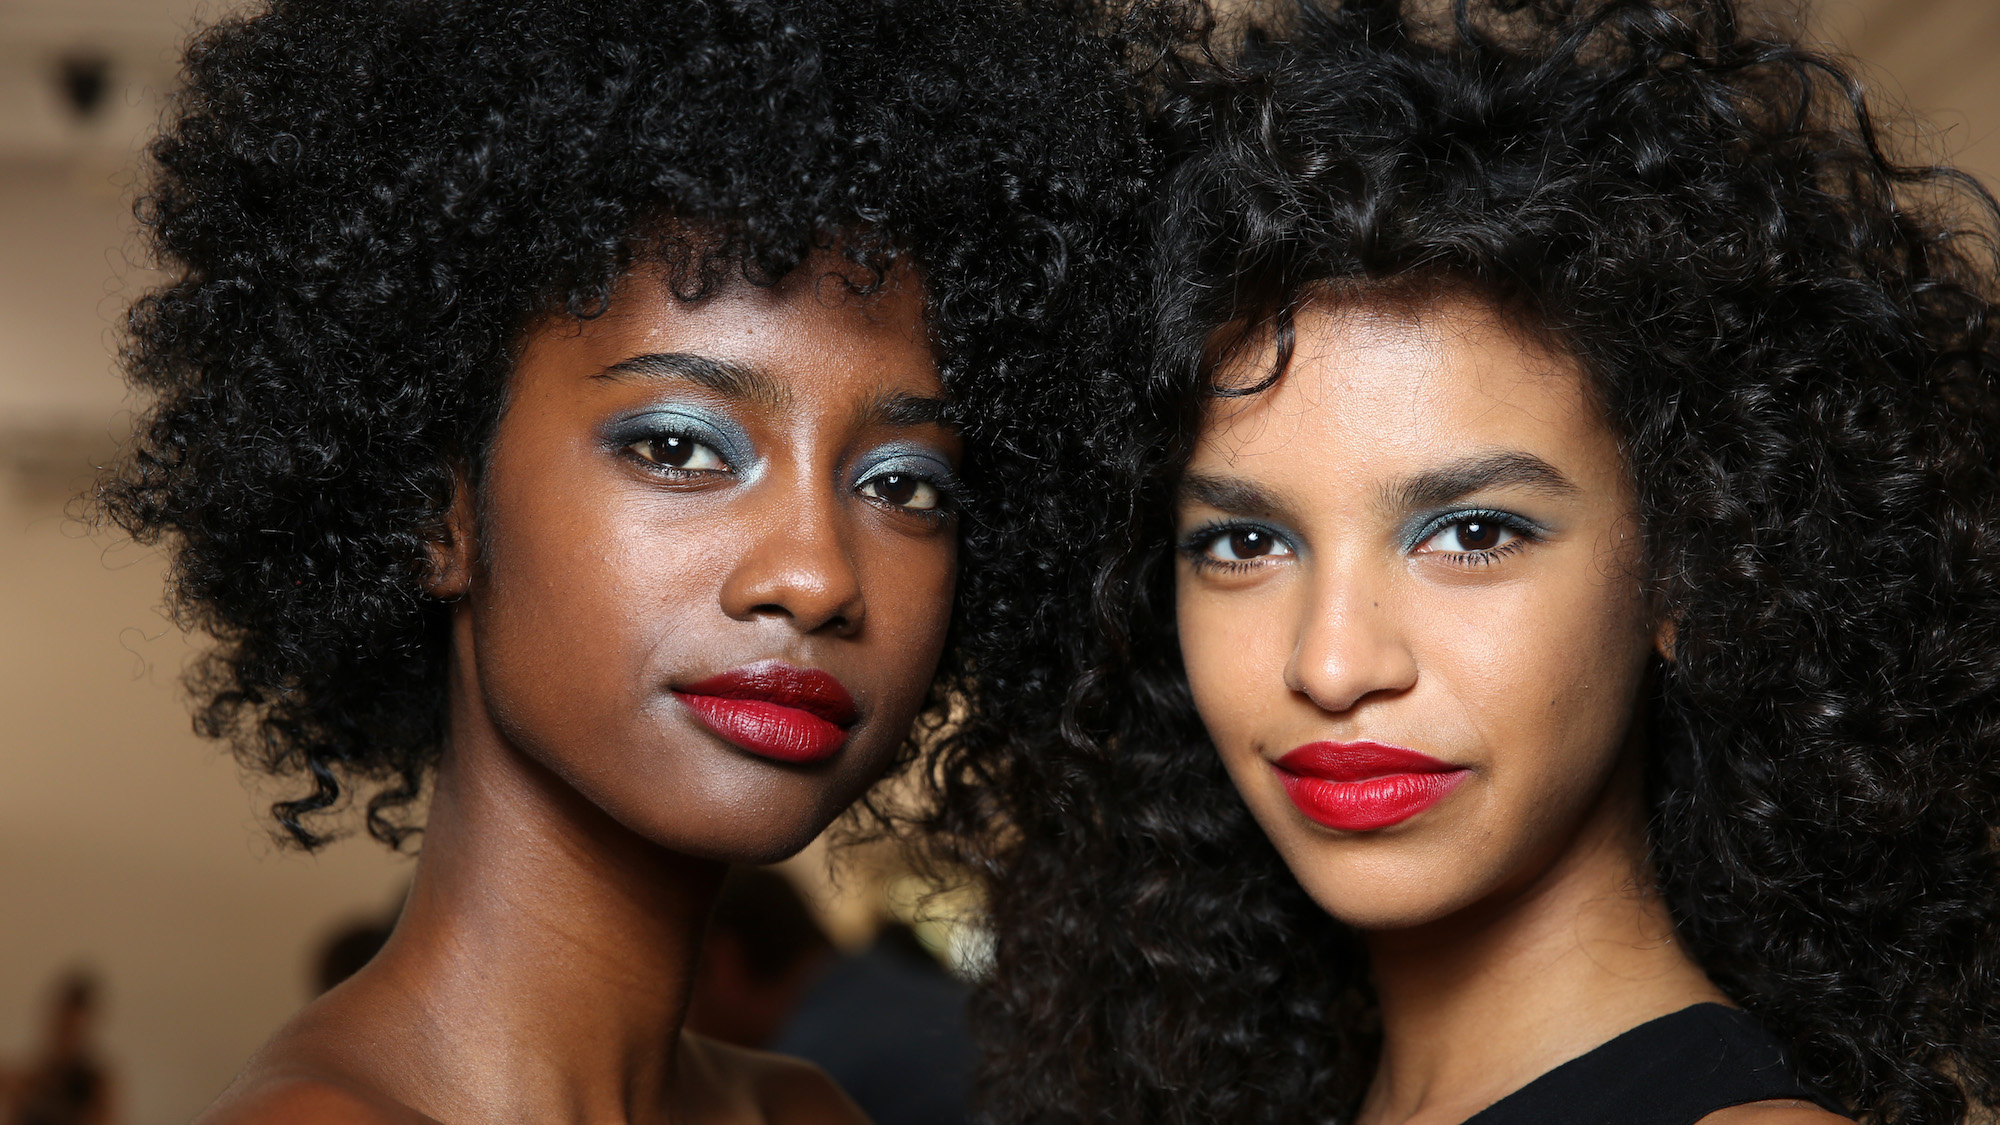 9 curly hair types: Your definitive guide to textured hair | Marie Claire UK